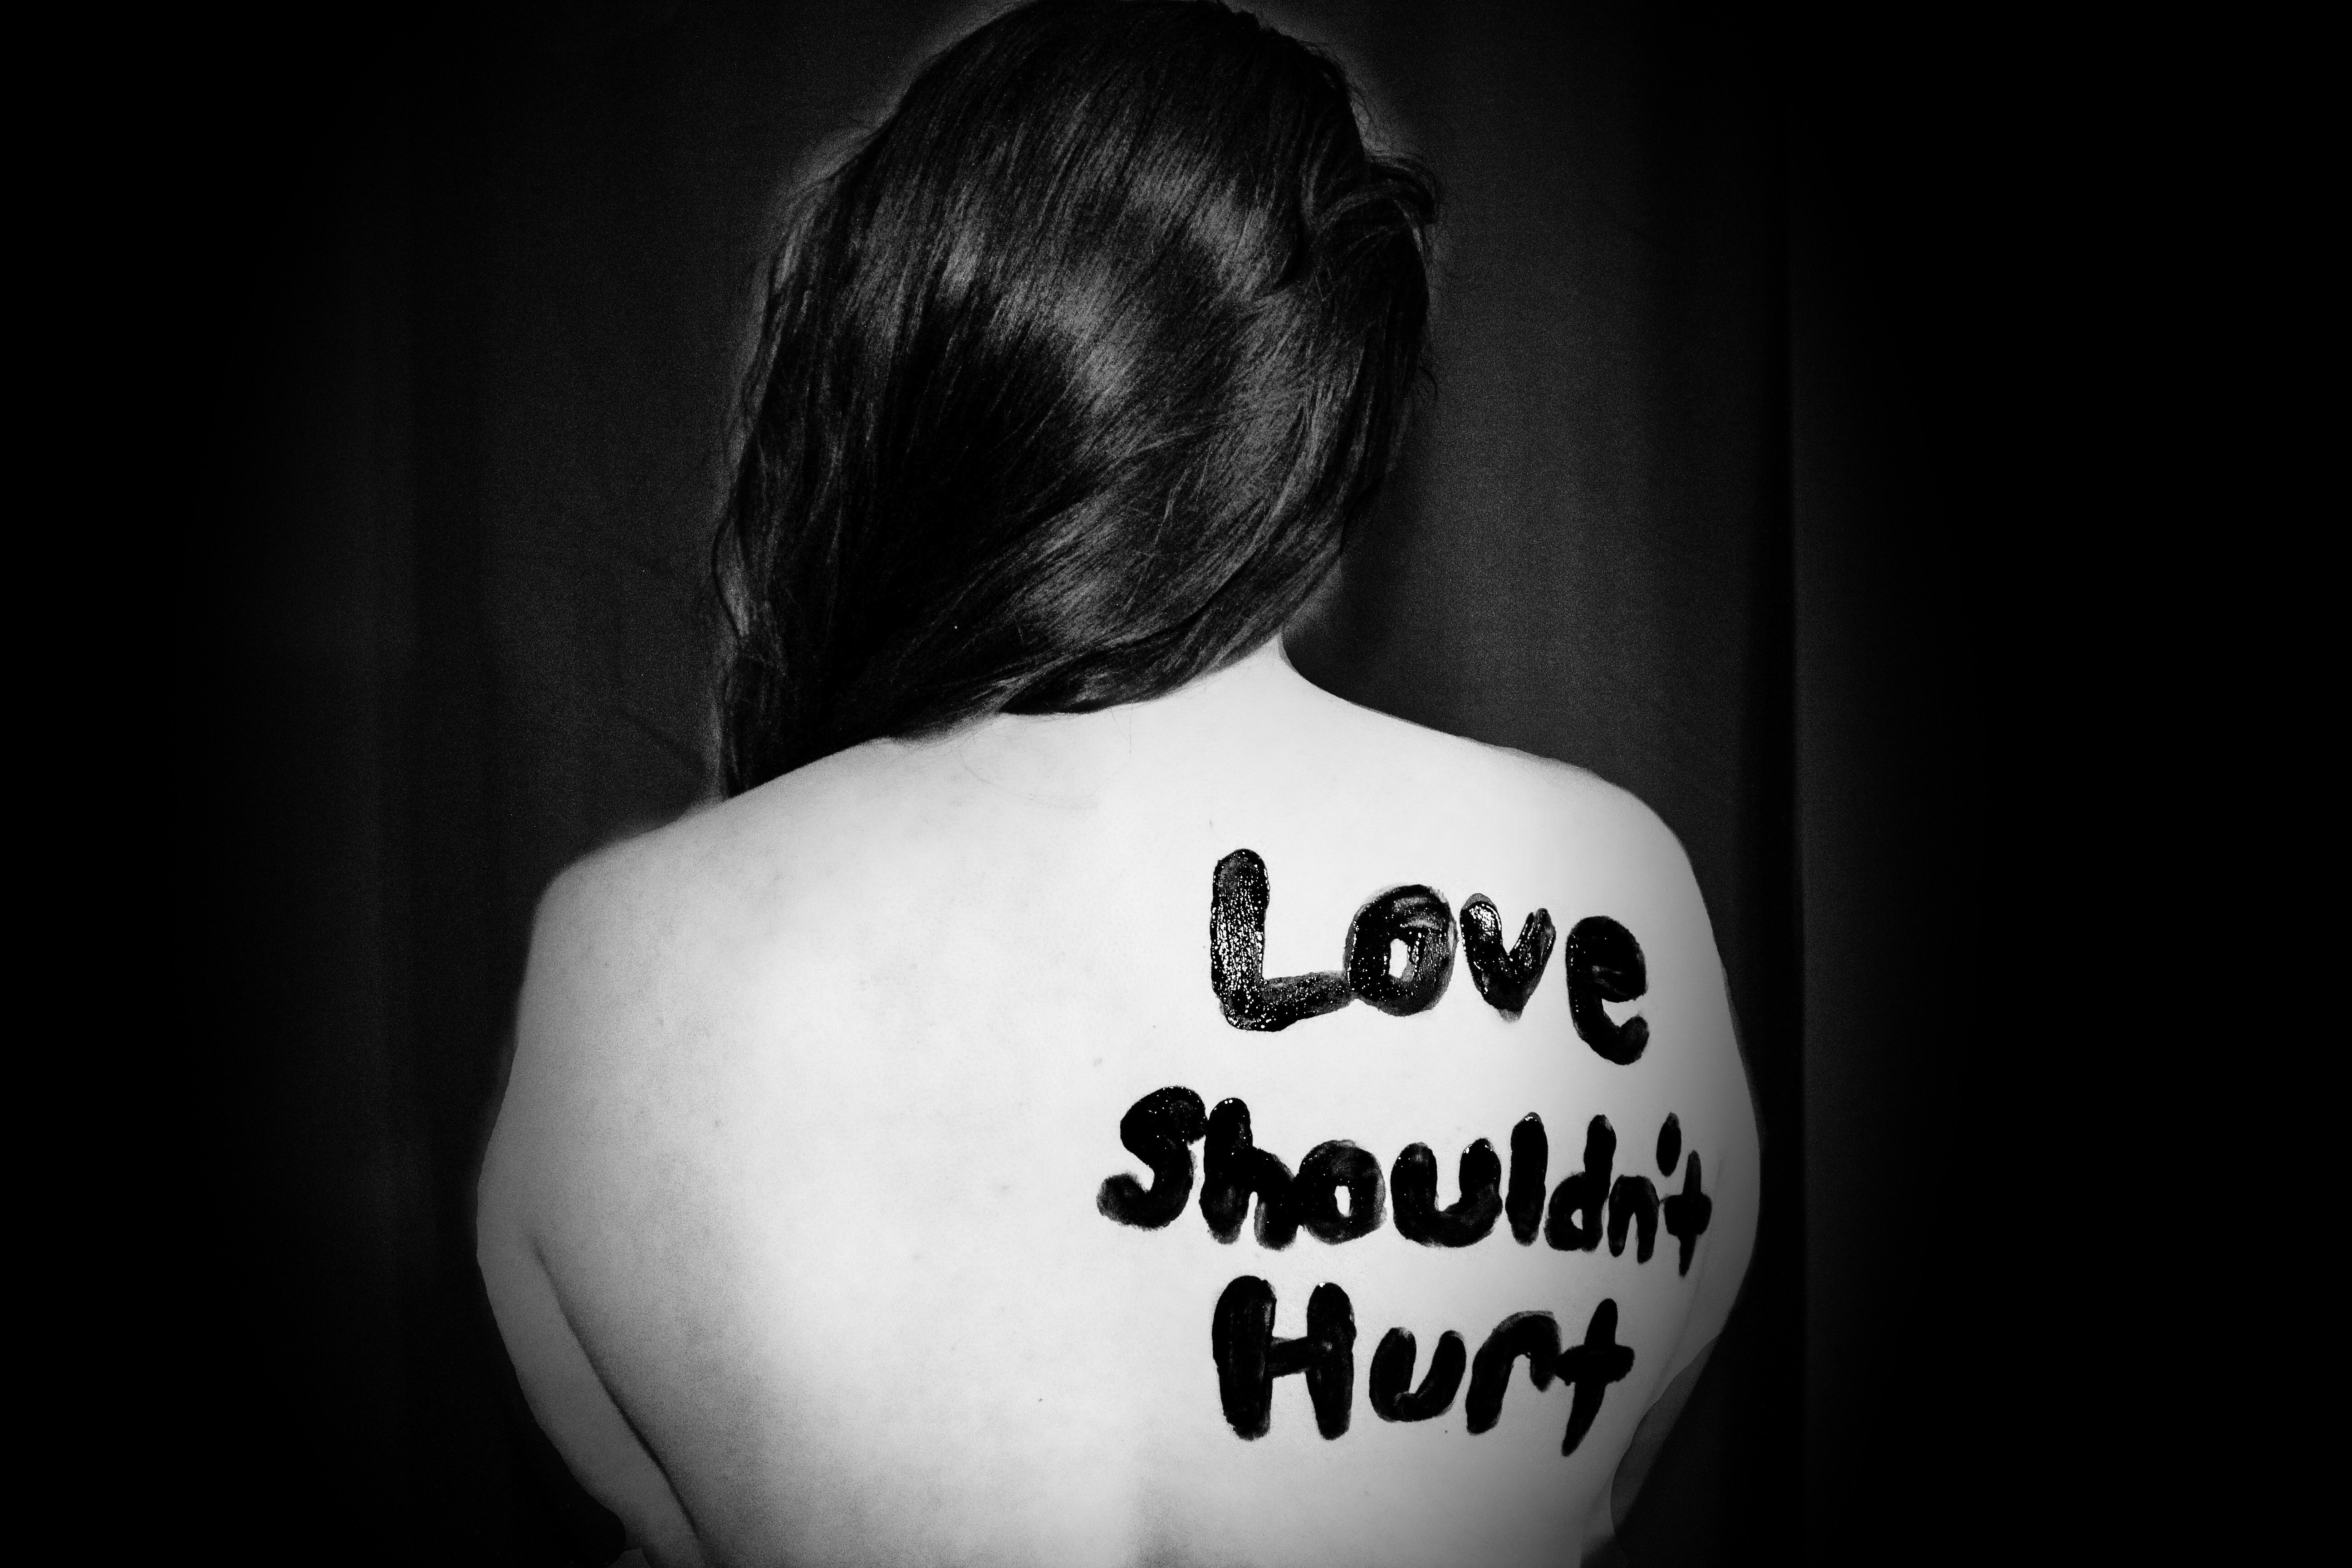 Woman with paint on her back that says "Love shouldn't hurt"